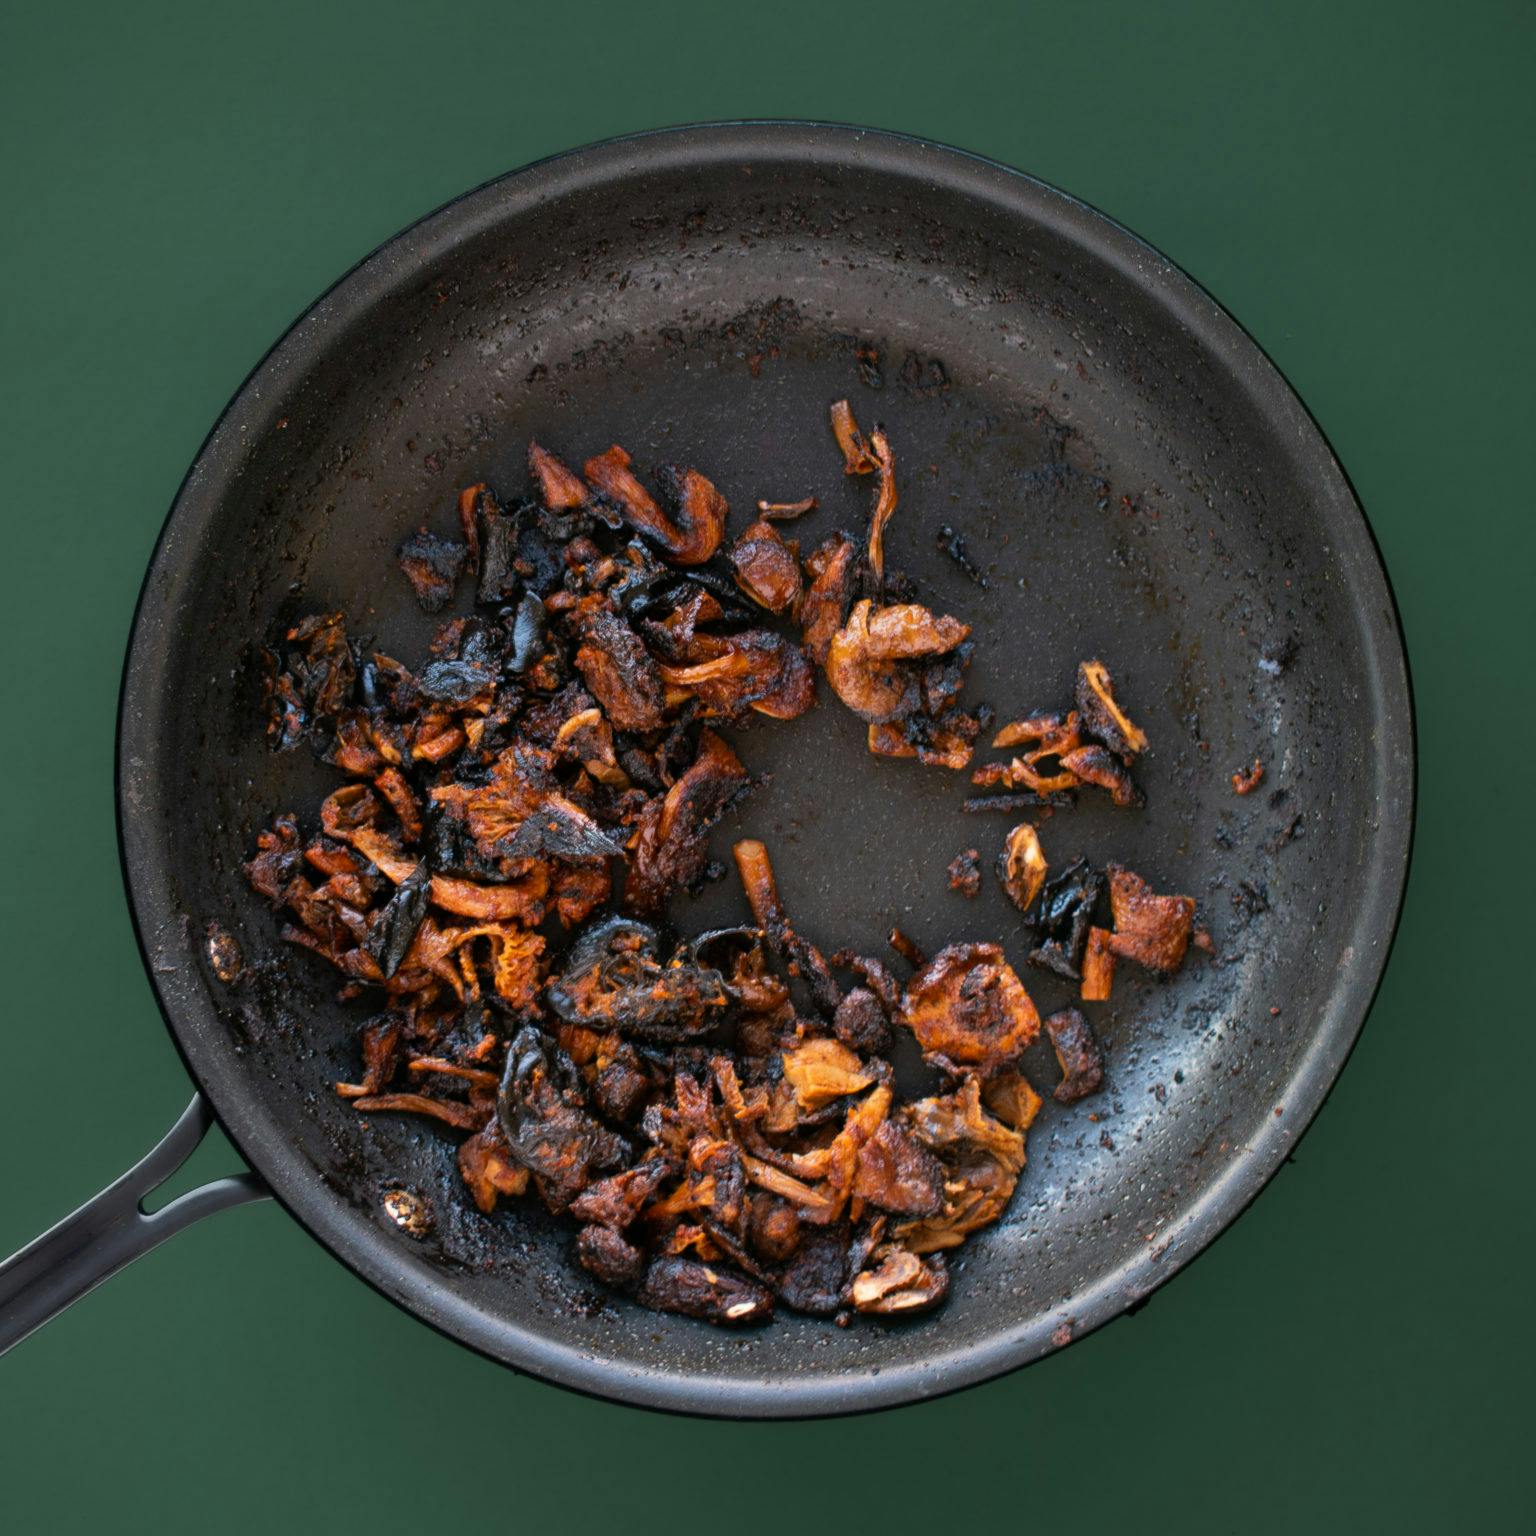 Repeat until mushrooms are deeply browned and slightly charred.